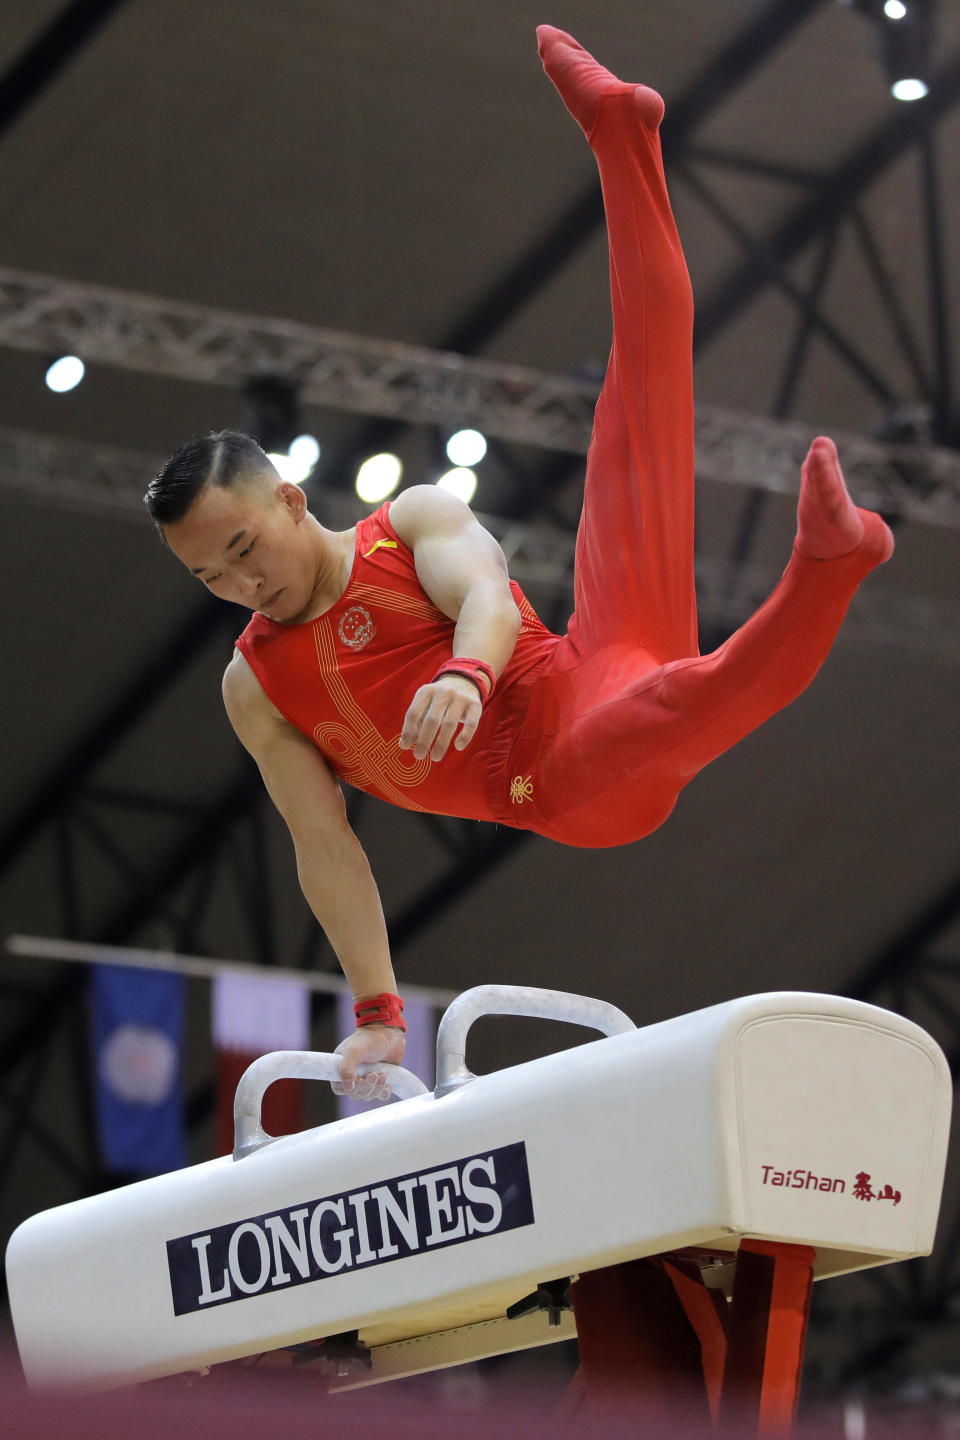 China's Xiao Ruoteng performs on the pommel horse during the Men's All-Around Final of the Gymnastics World Chamionships at the Aspire Dome in Doha, Qatar, Wednesday, Oct. 31, 2018. (AP Photo/Vadim Ghirda)